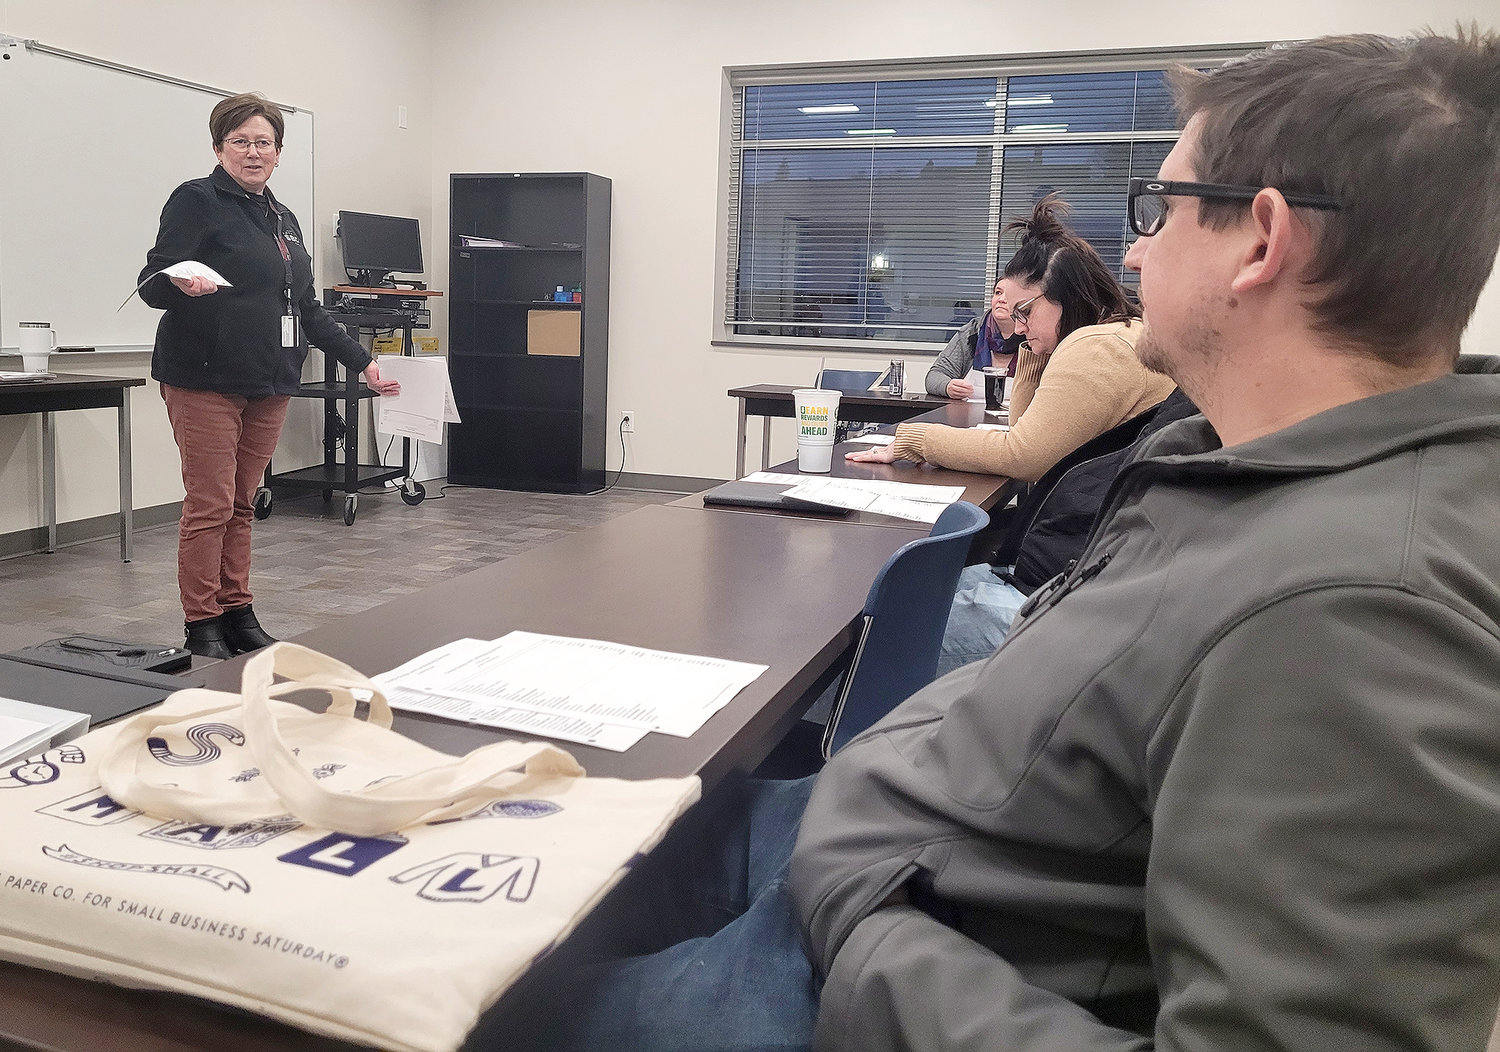 SCC Small Business Development Center Director Janine Clover talks with students Wednesday nighty during the DreamBuilder program in Fort Madison.